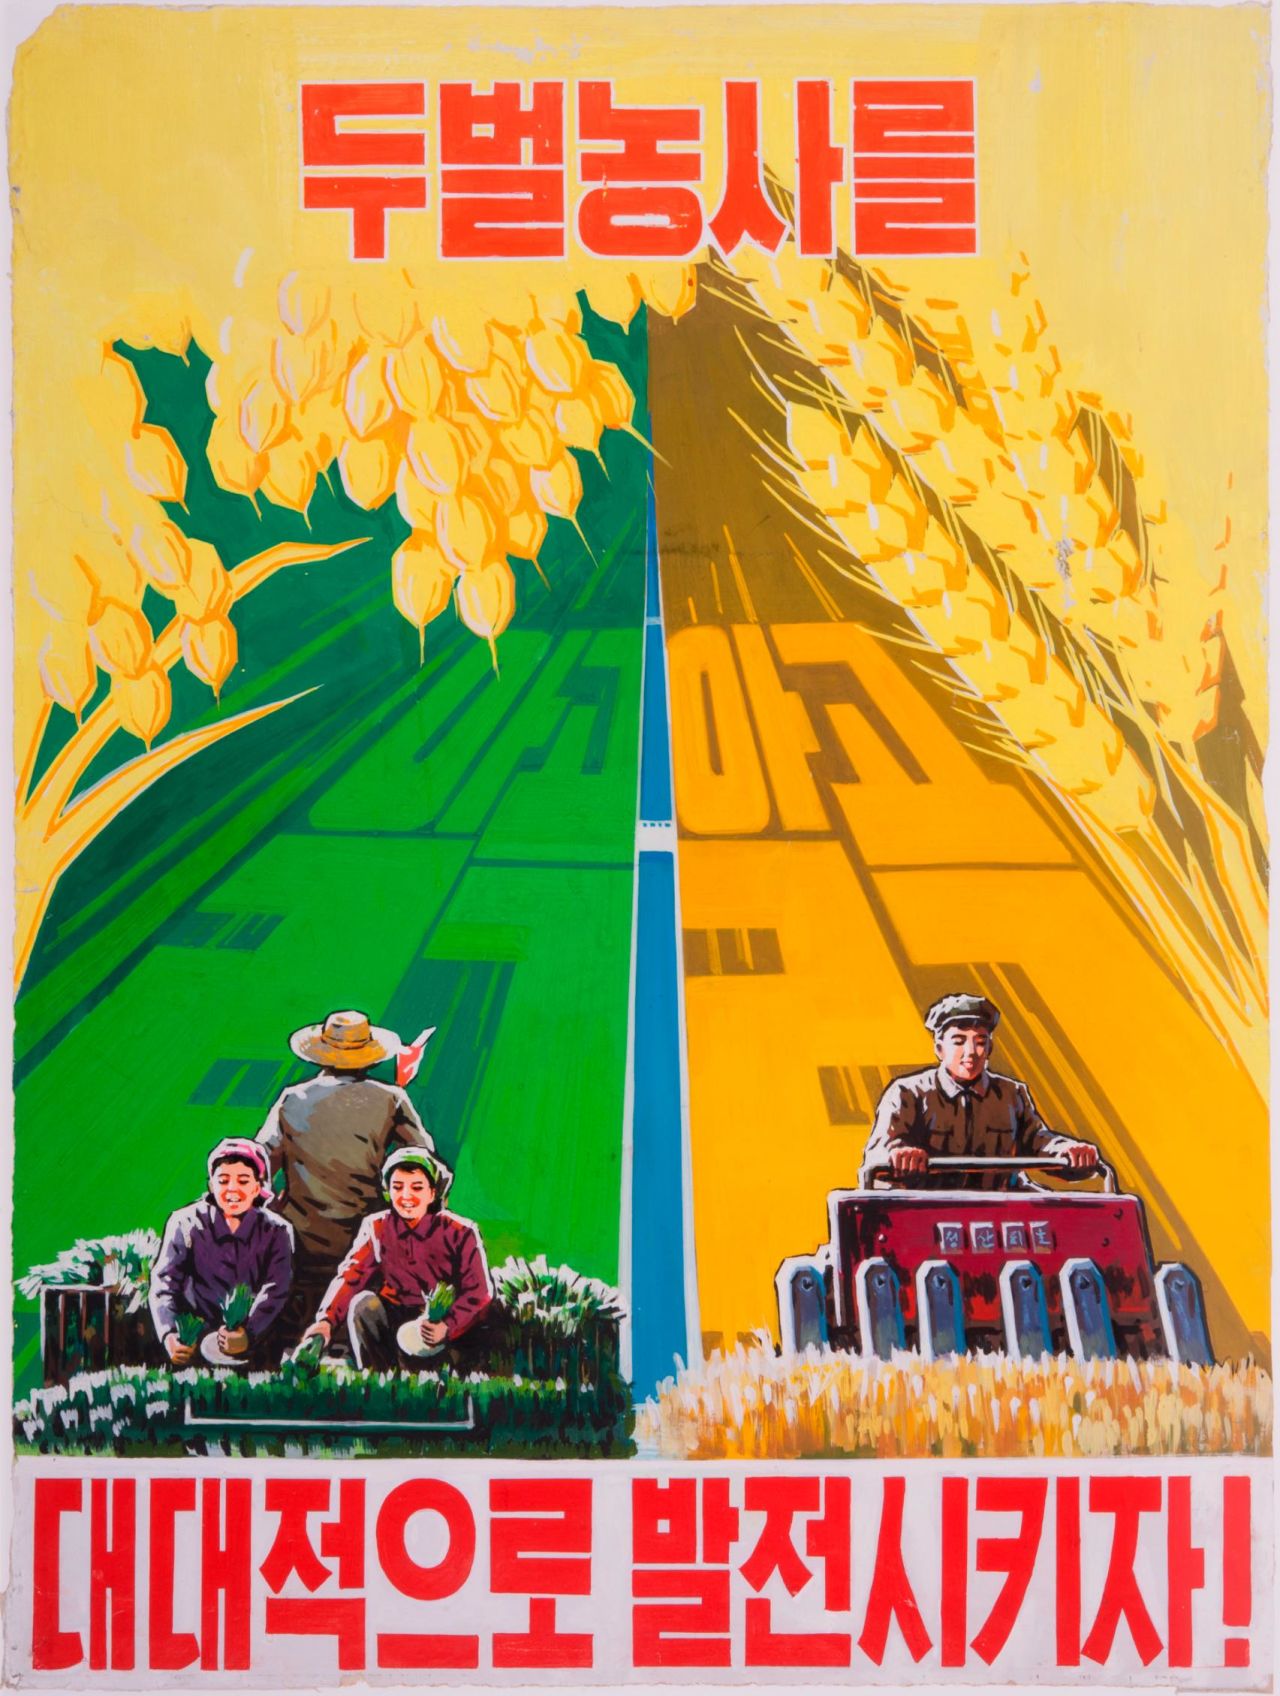 Propaganda posters are used to promote better practices in agriculture and industry.